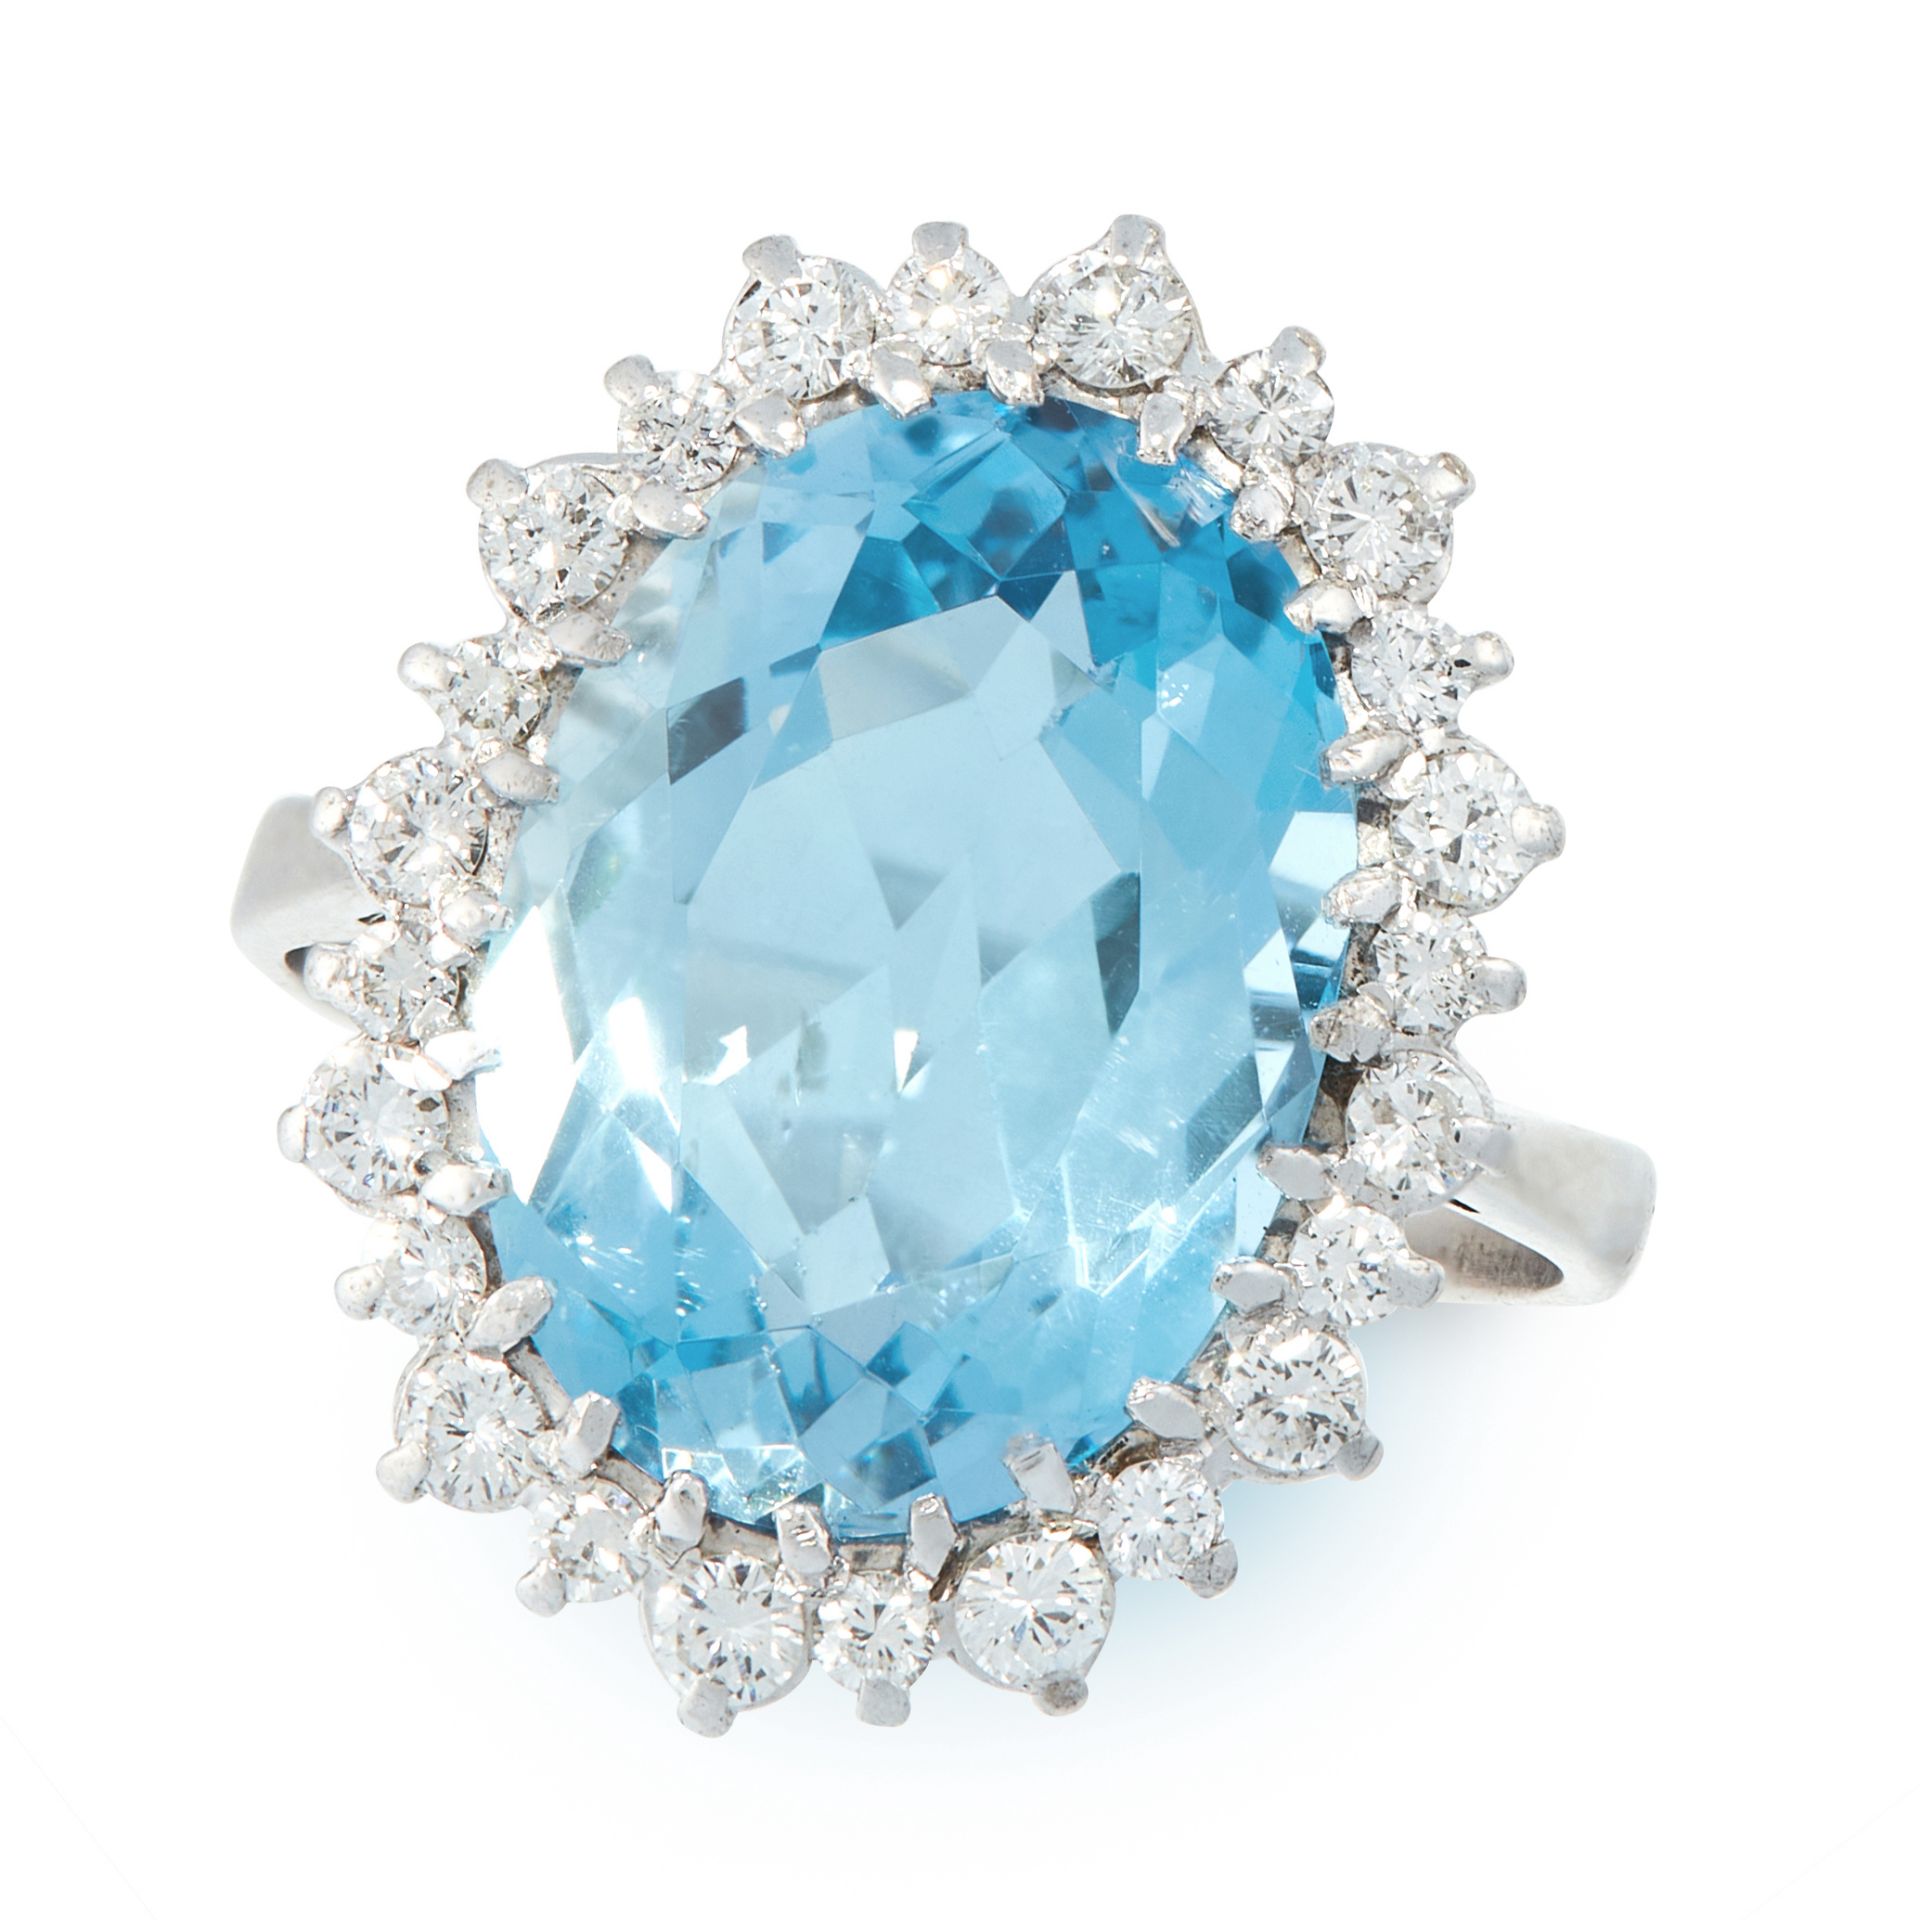 AN AQUAMARINE AND DIAMOND DRESS RING set with an oval cut aquamarine of 6.12 carats, within a border